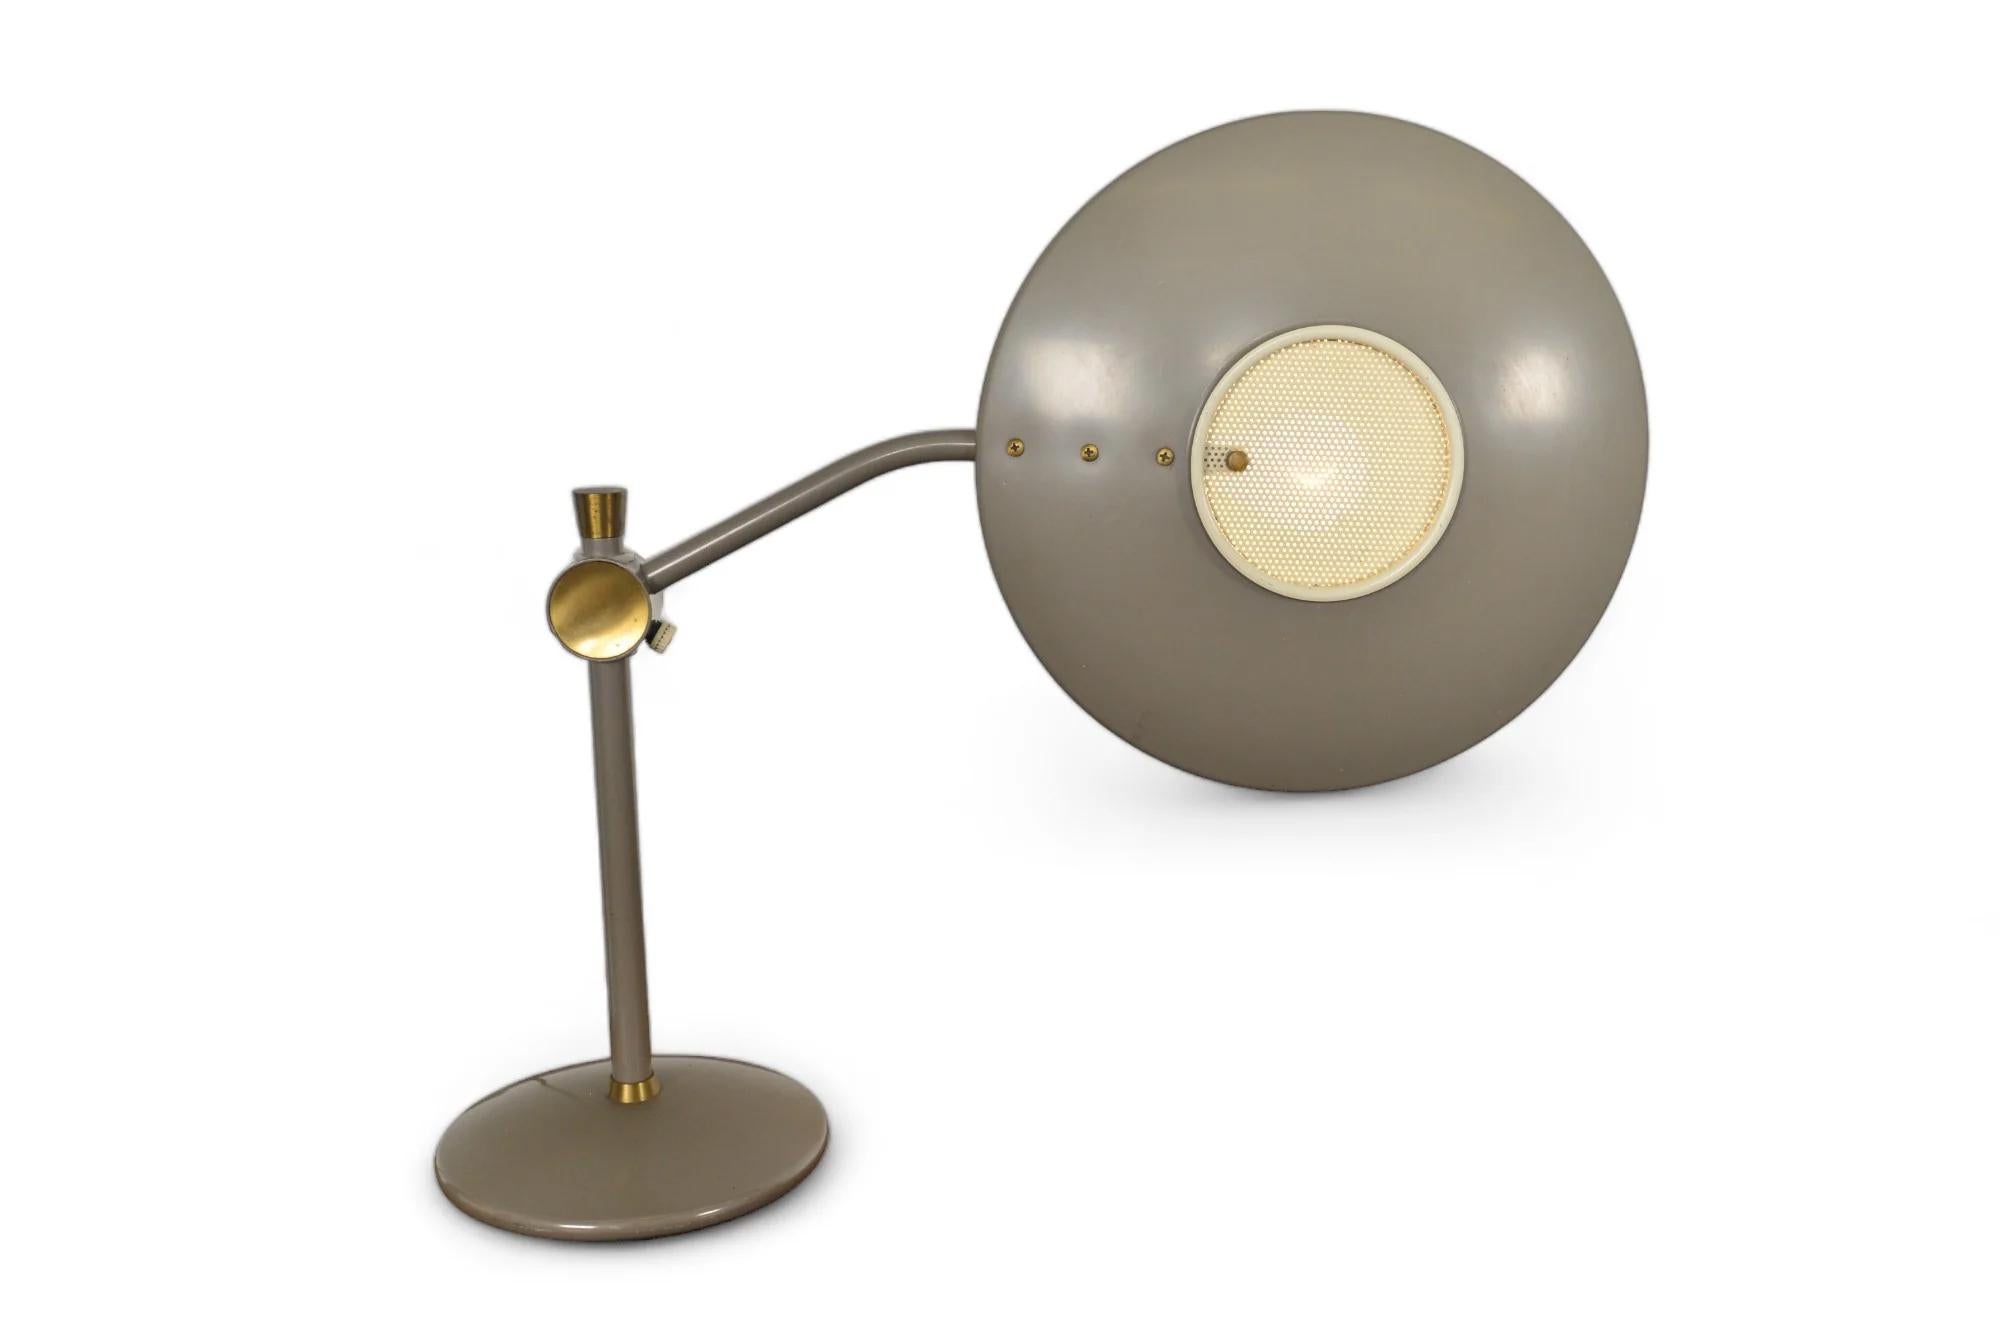 American Dazor Flying Saucer Space Age Table Lamp For Sale